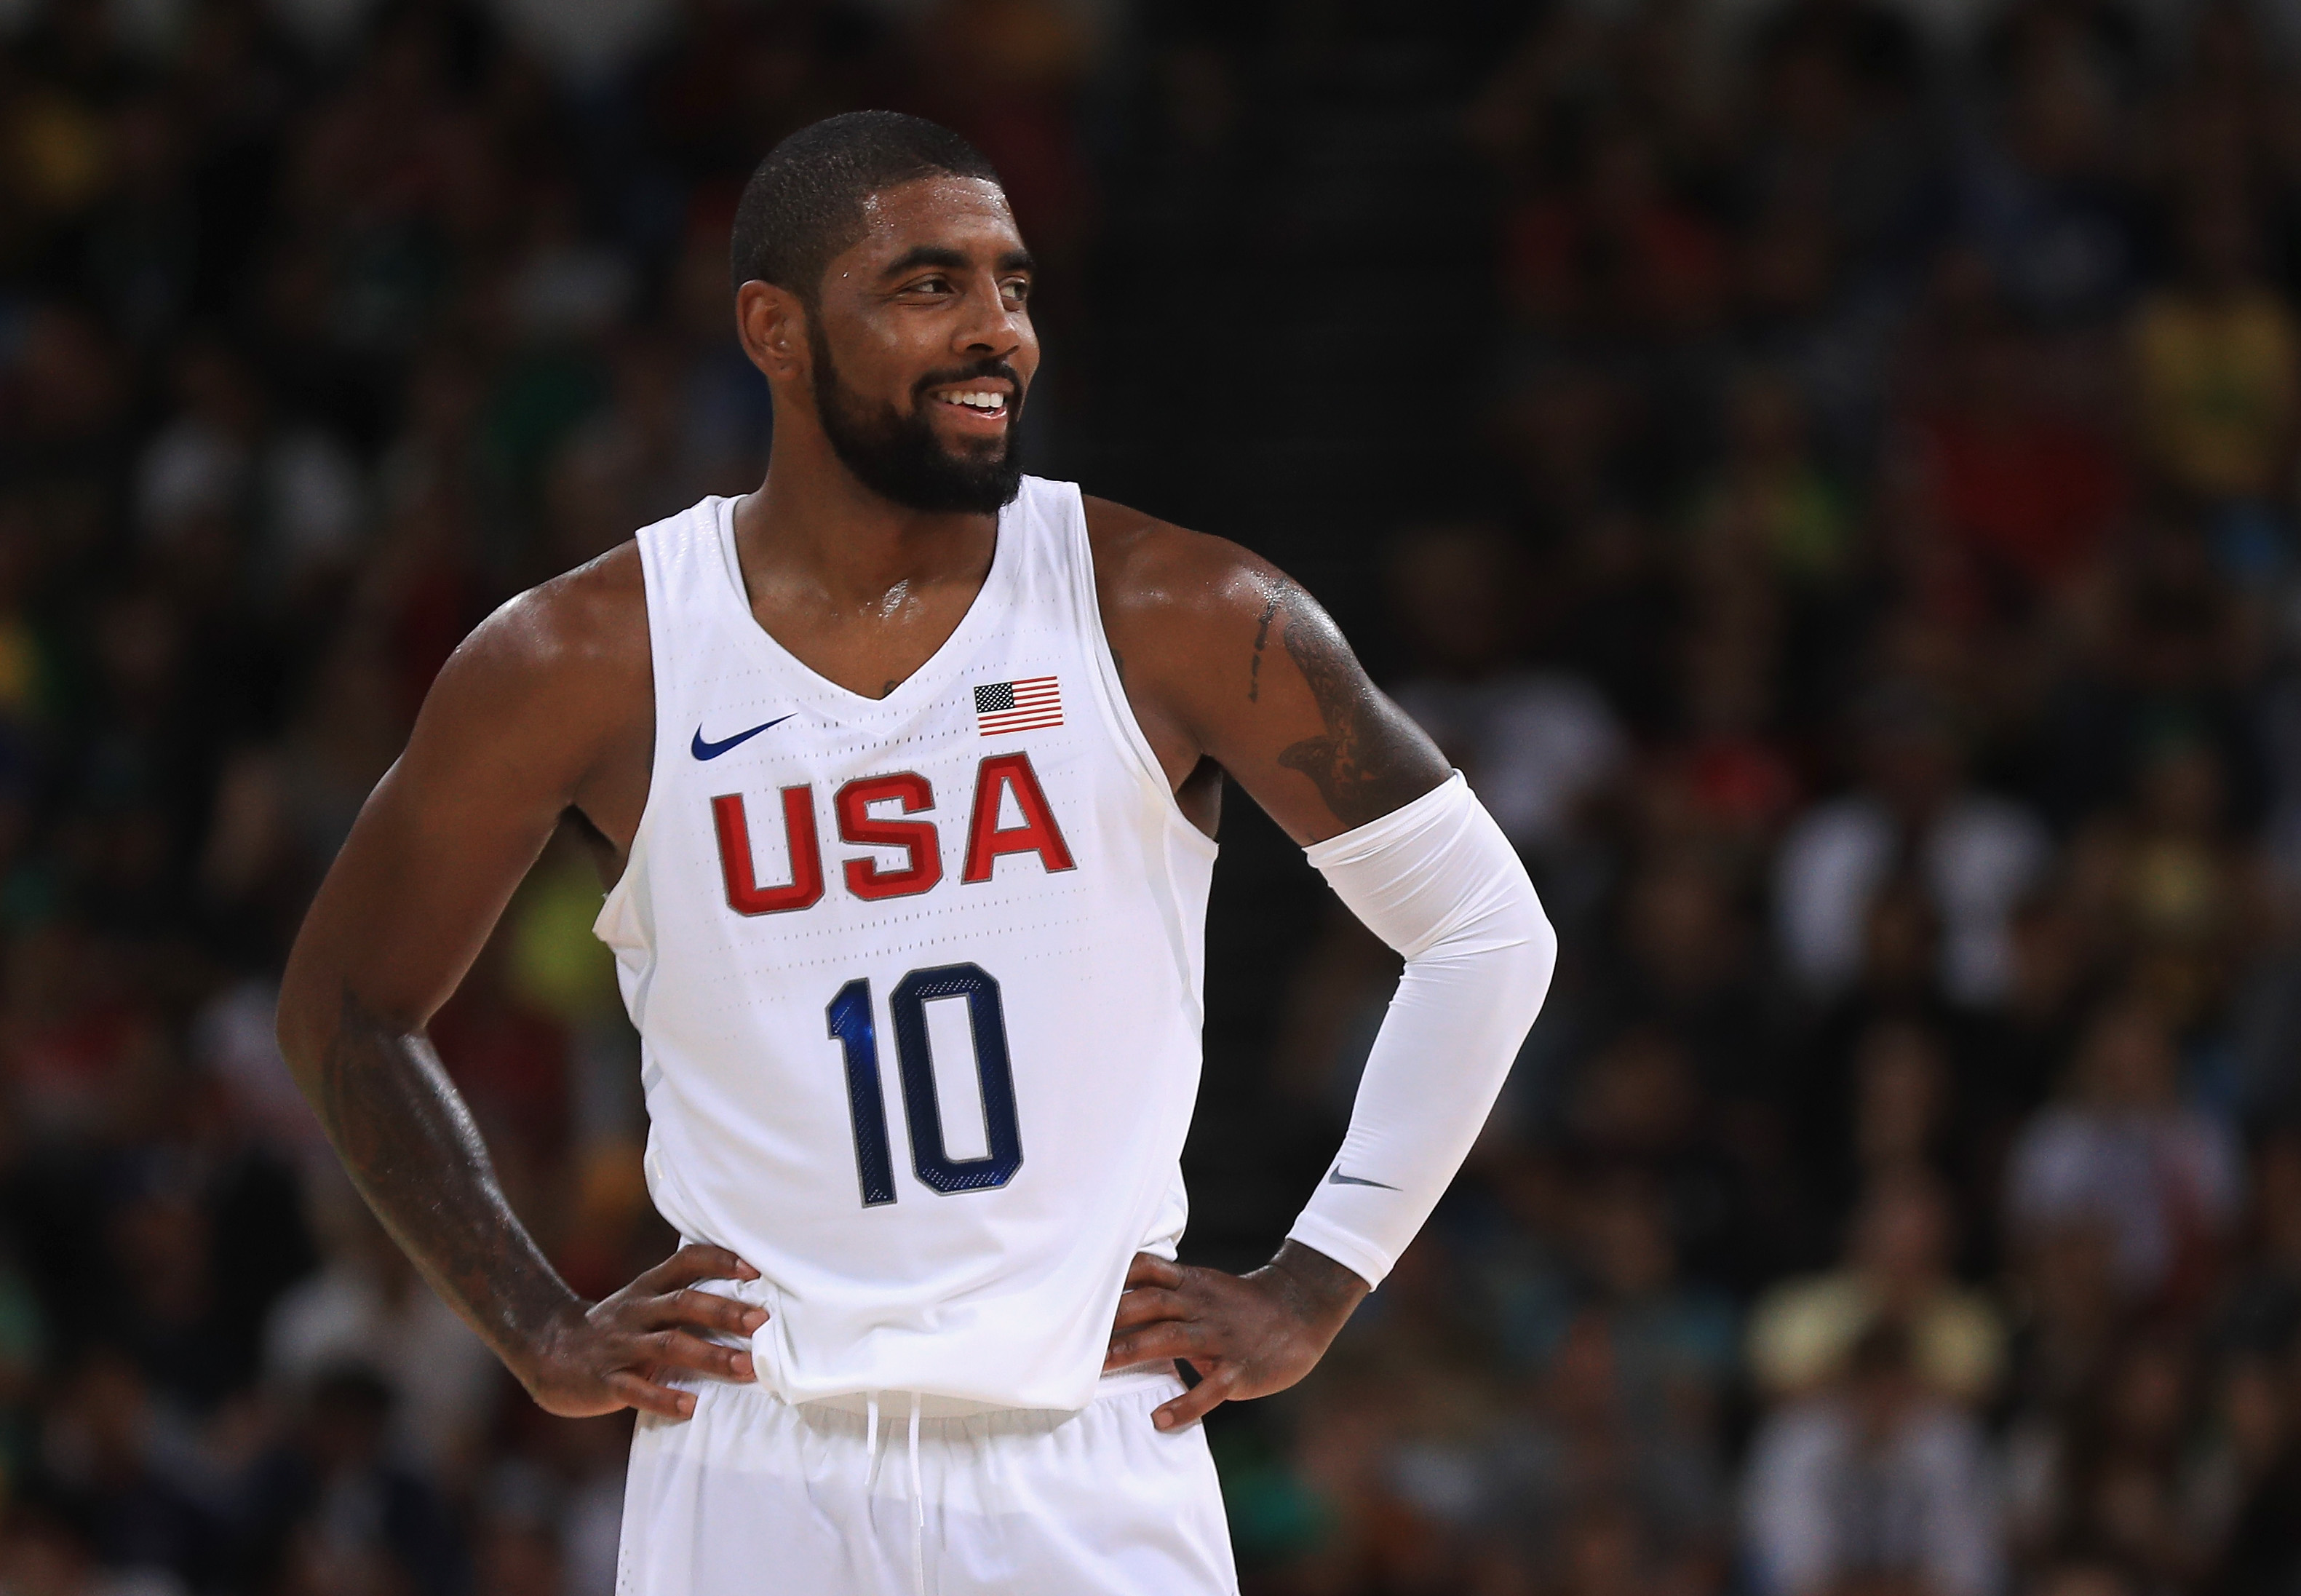 Cleveland Cavaliers point guard Kyrie Irving can change direction so well